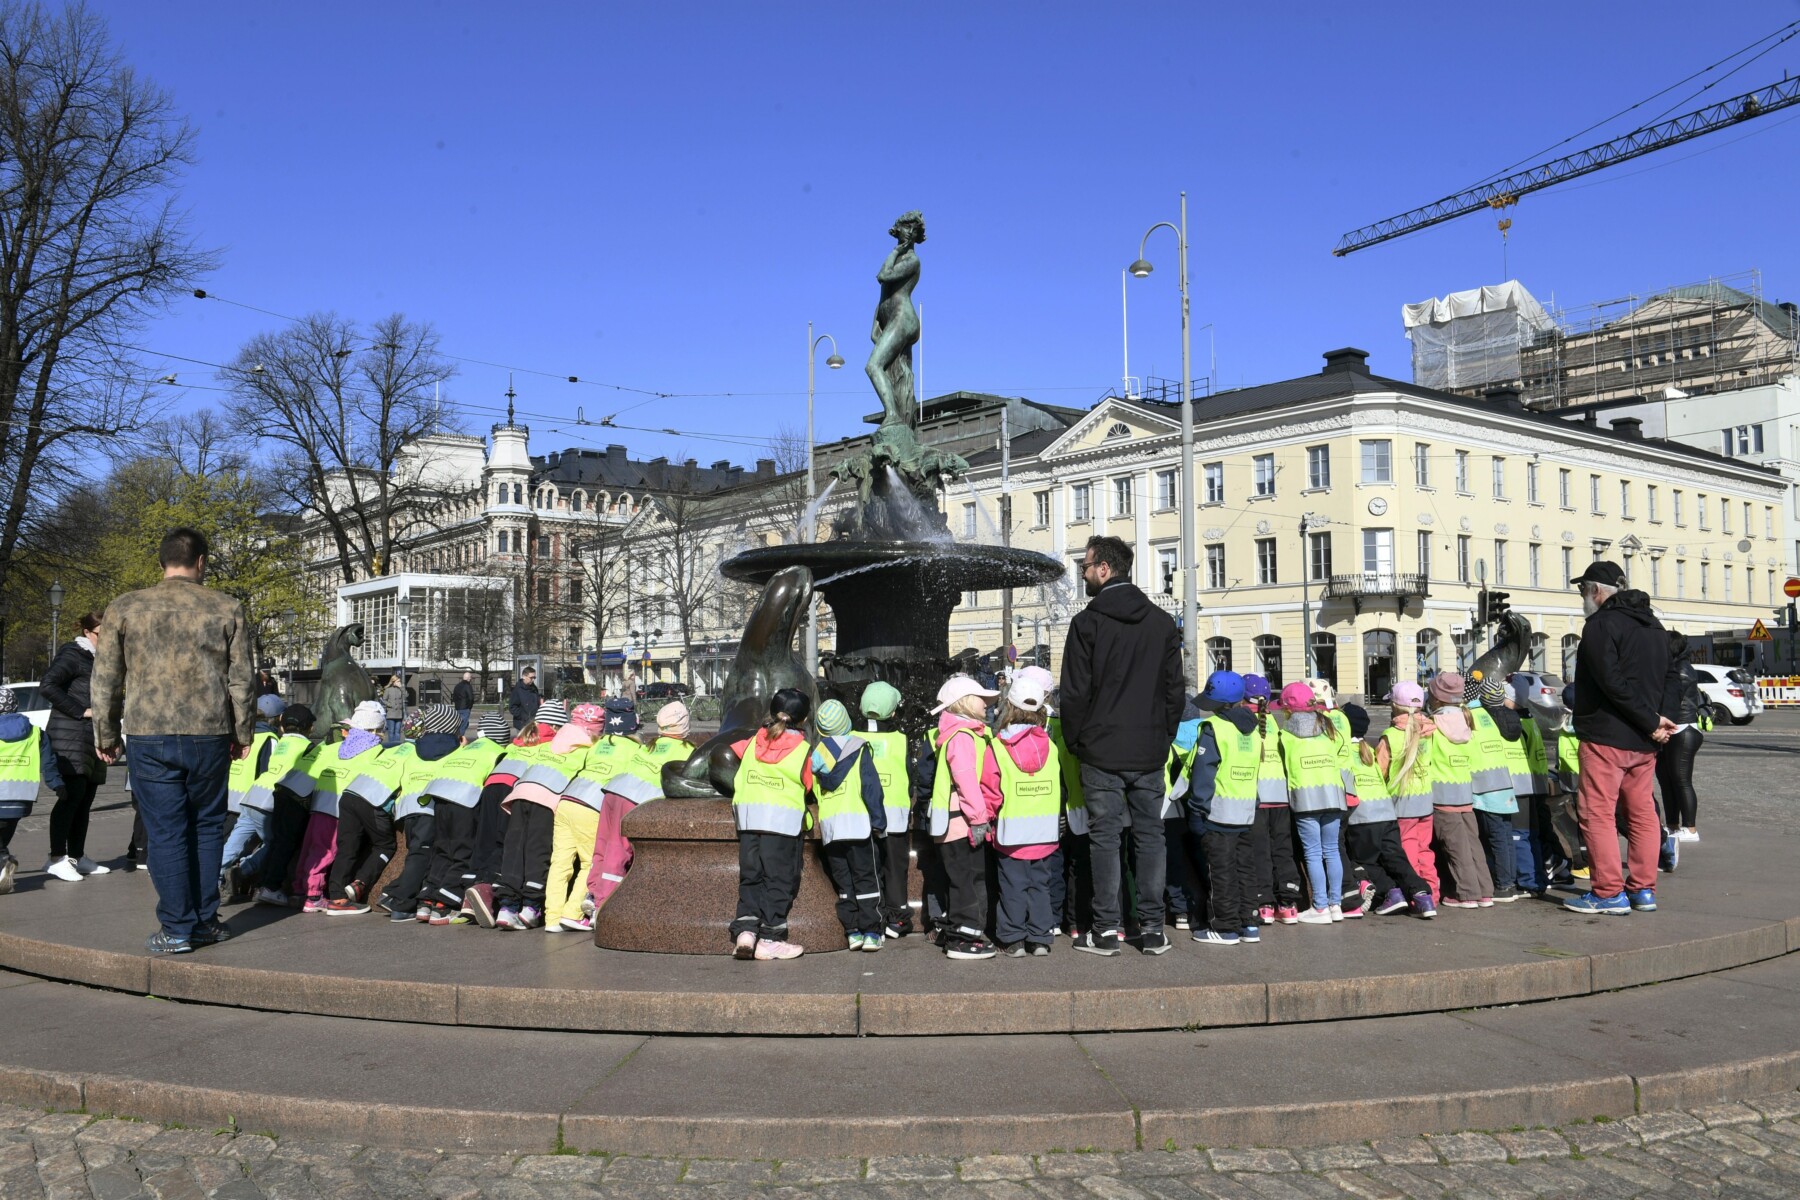 On a plaza with buildings in the background, several dozen children and teachers are gathered around a metal statue on a tall pedestal.